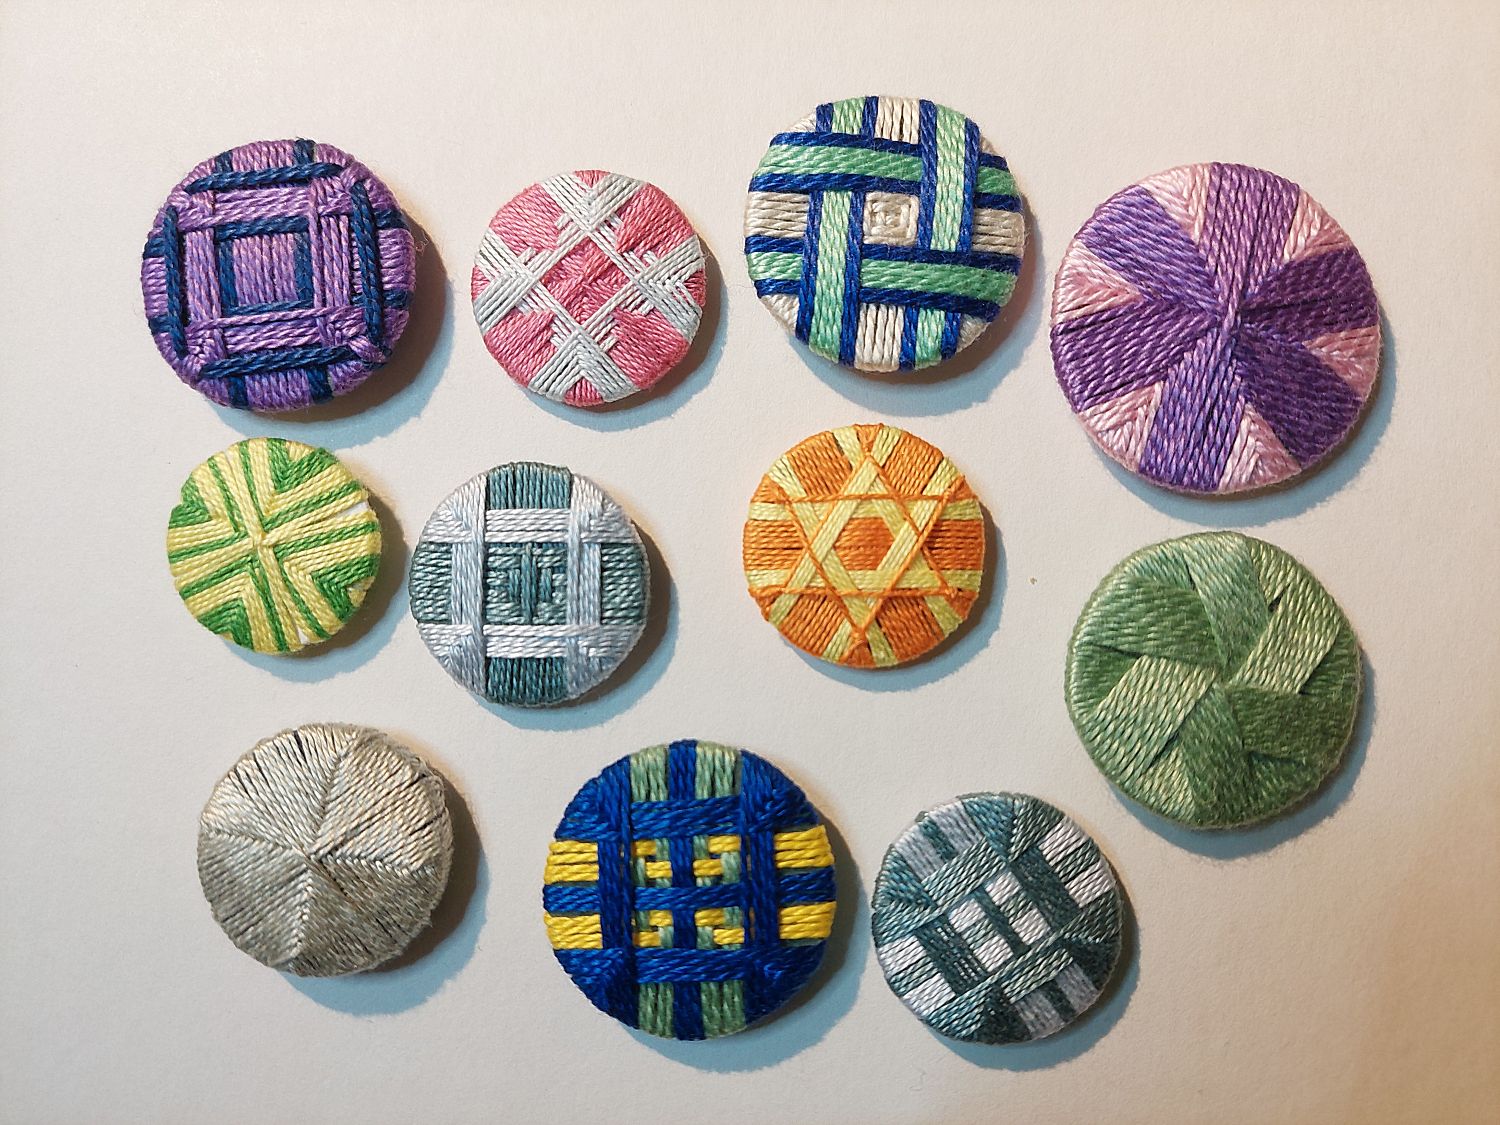 Thread wrapped buttons.  [Image is:  'Thread wrapped buttons'].